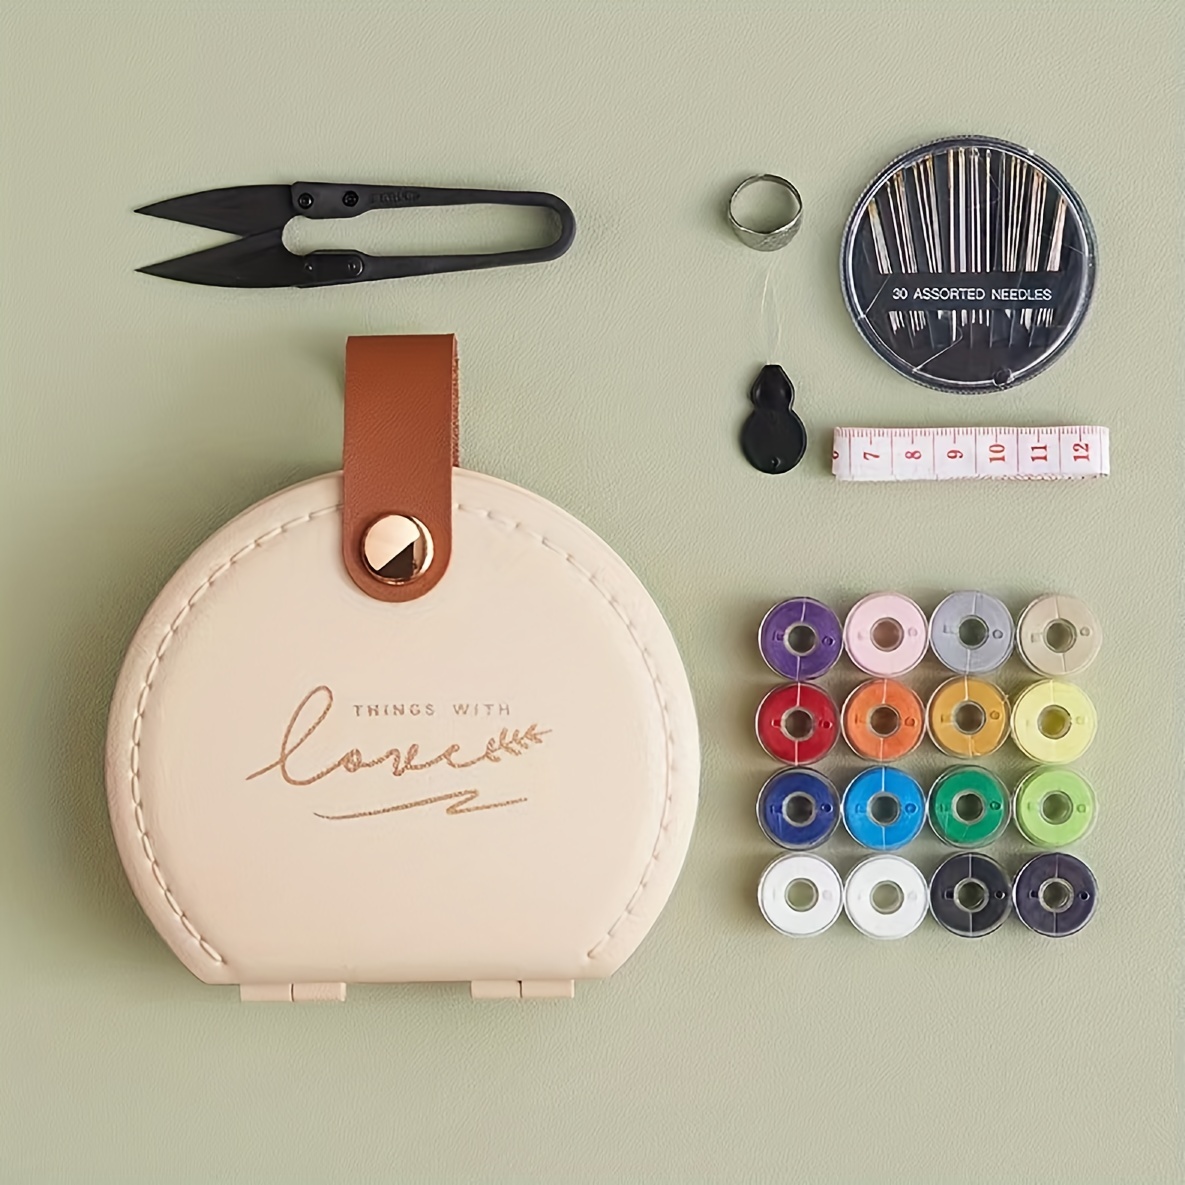  Sewing Kit, Portable Travel Sewing Kit for Adults